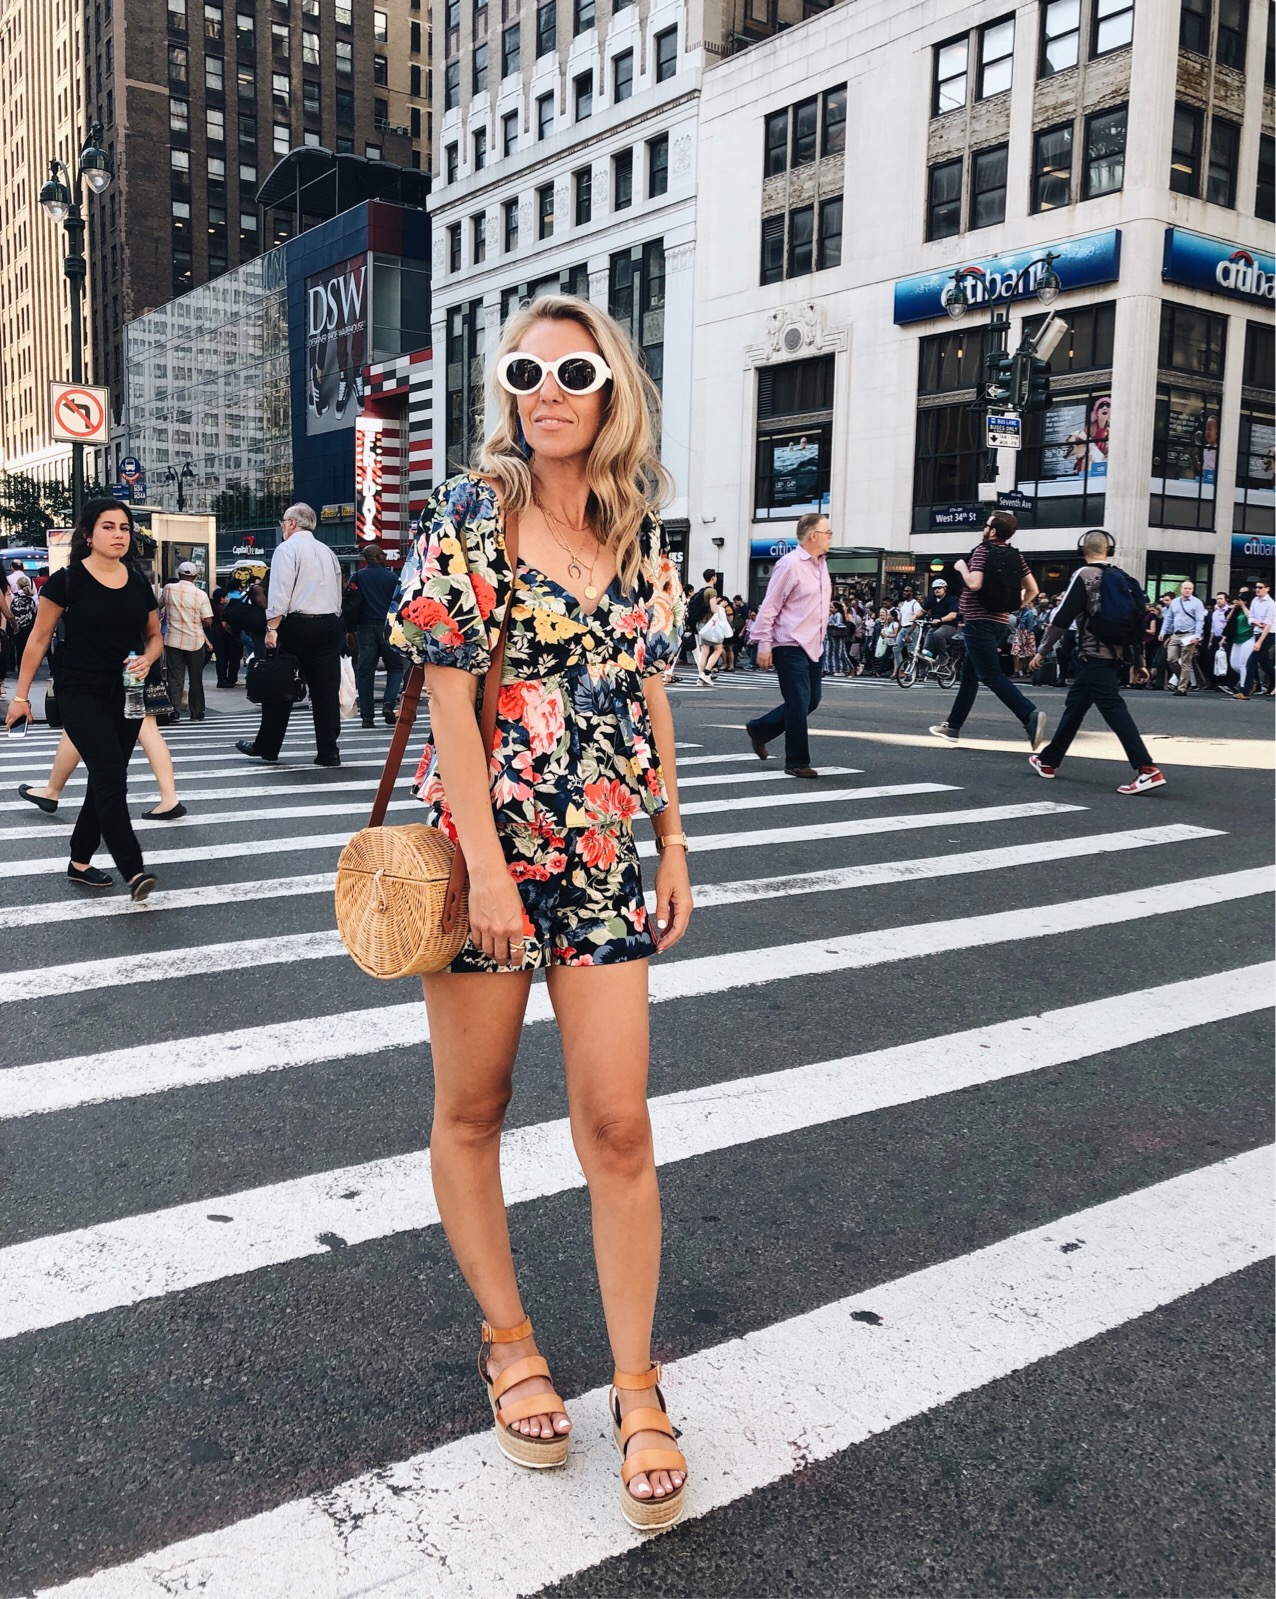 ADVENTURES IN NEW YORK- Jaclyn De Leon Style + Zara floral matching set + NY Street style + platform sandals + straw crossbody handbag + retro style sunglasses + ruffle shorts + statement sleeve + what to wear this summer + casual spring style